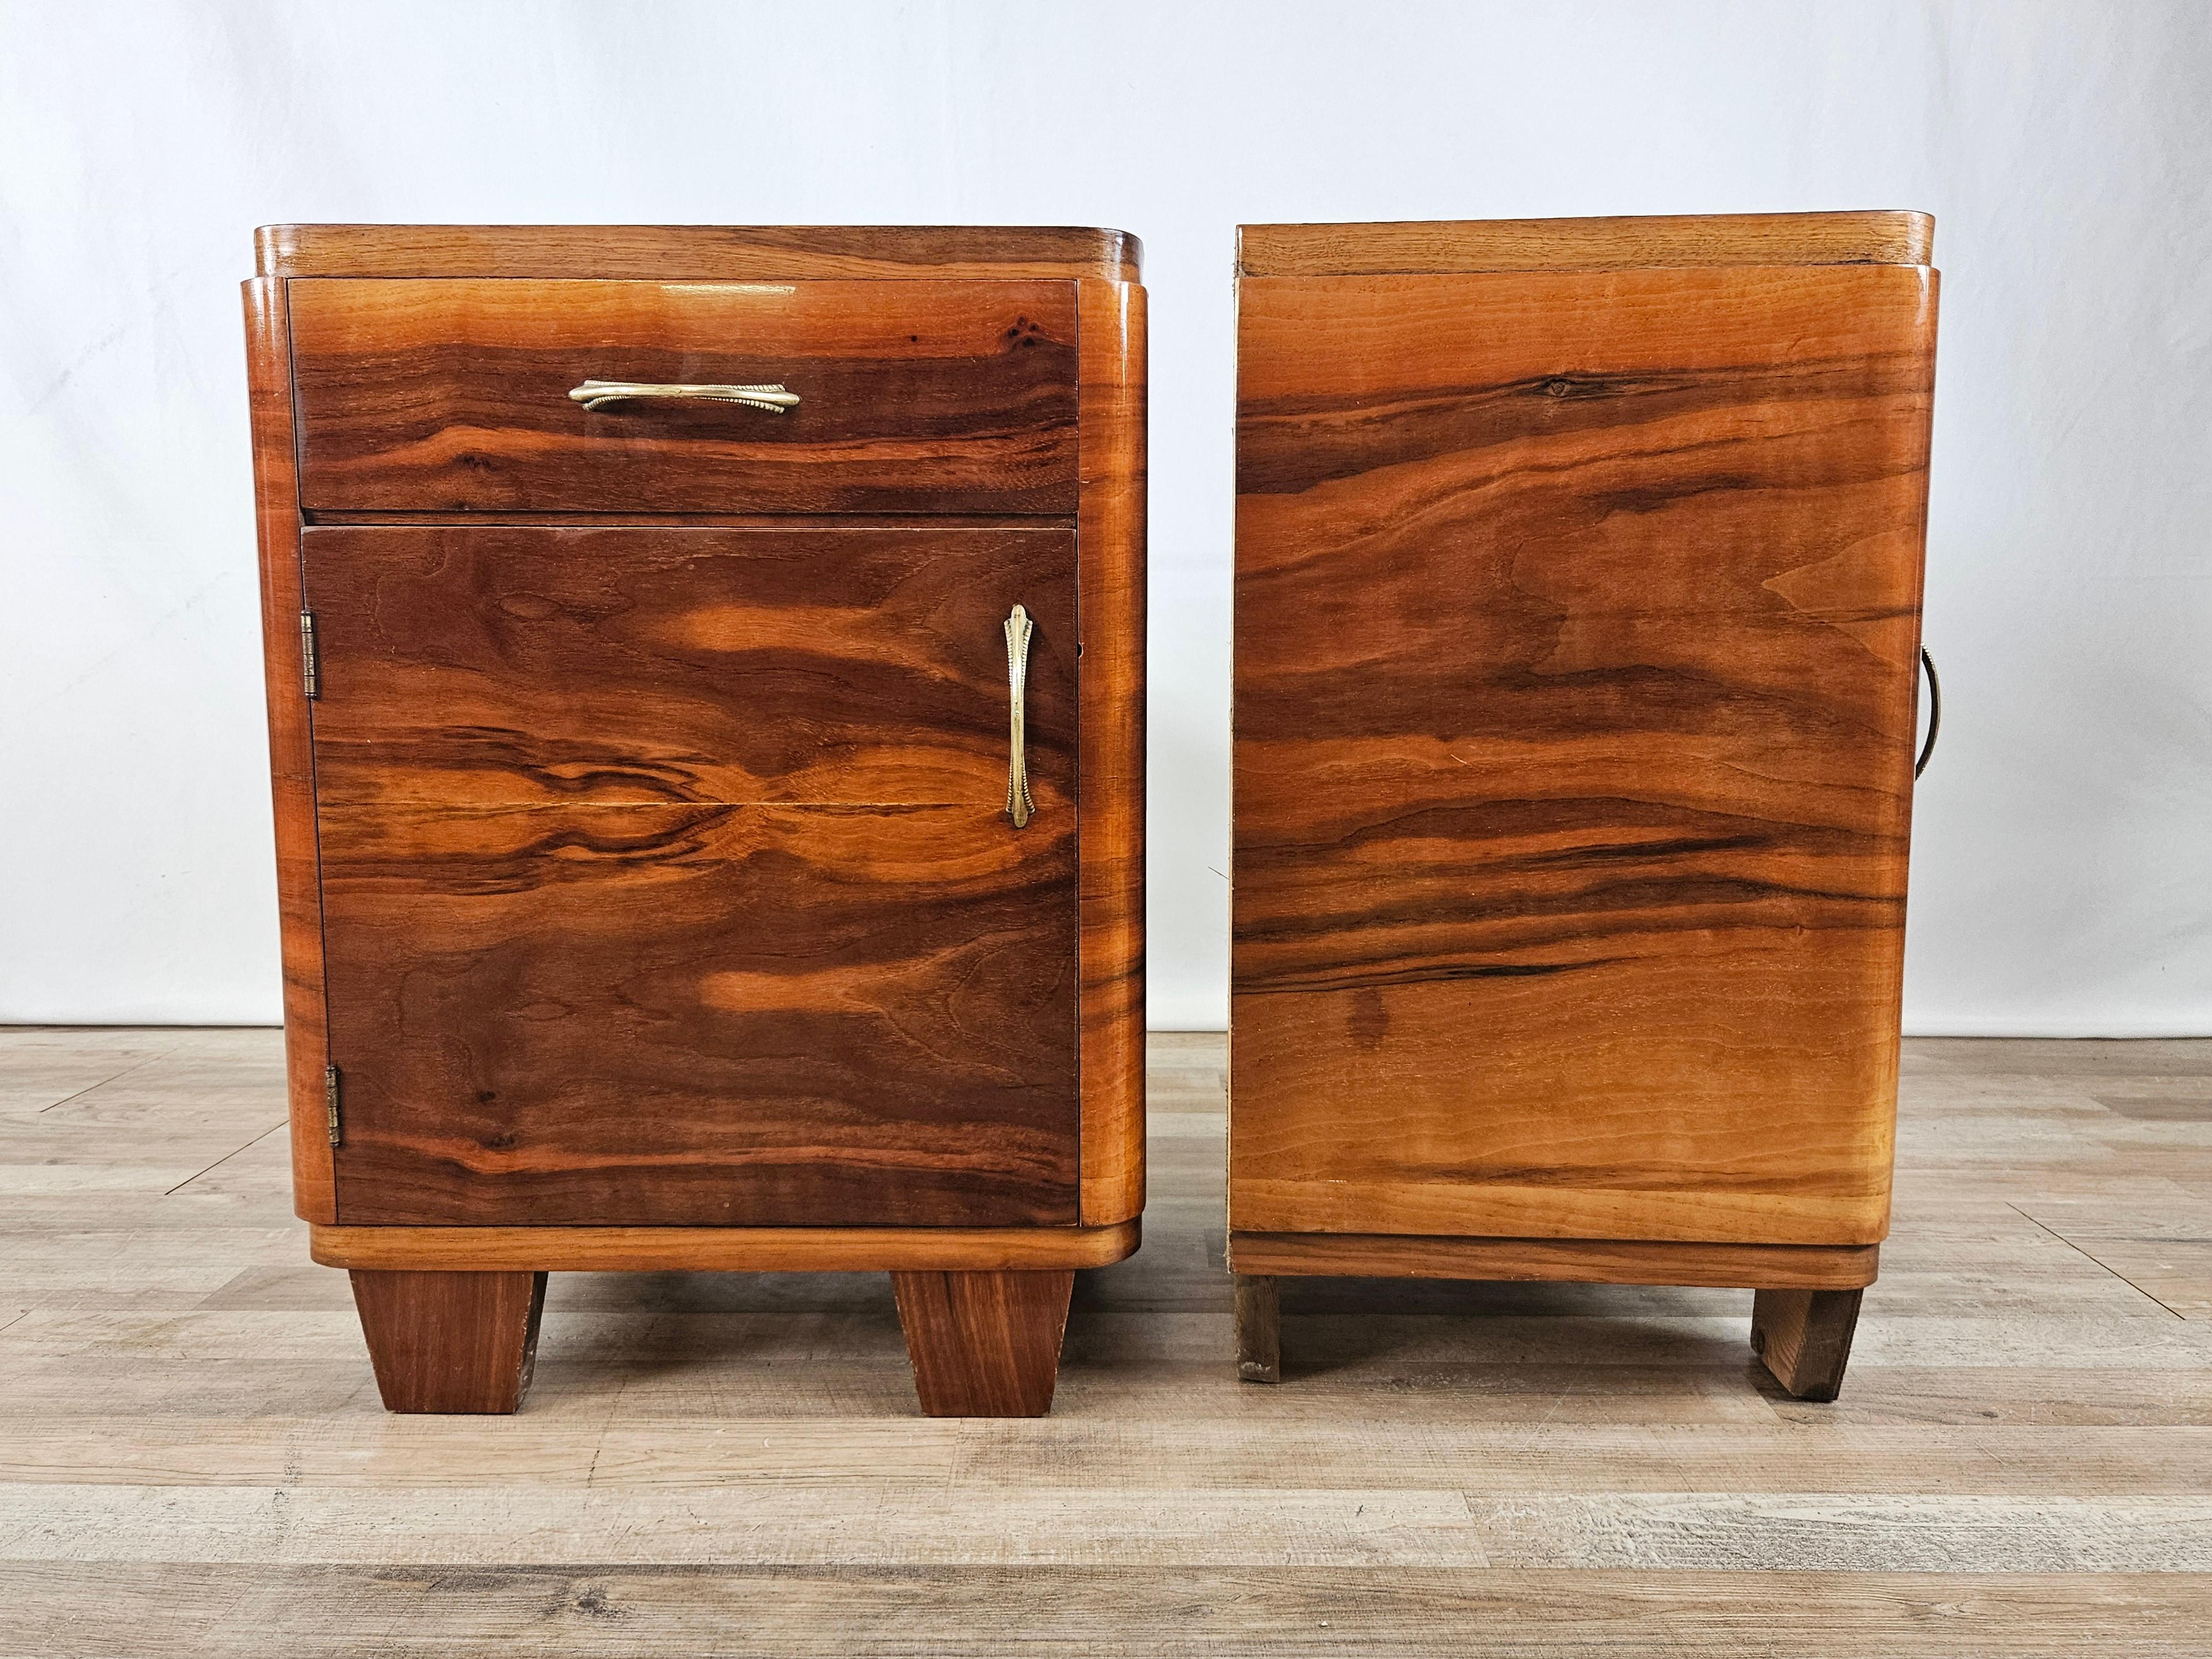 Italian-made 1950s bedside tables in polished walnut, fitted with drawer and door with interior compartment. 
Brass handles original to the period.

They show normal signs of wear due to age and use.